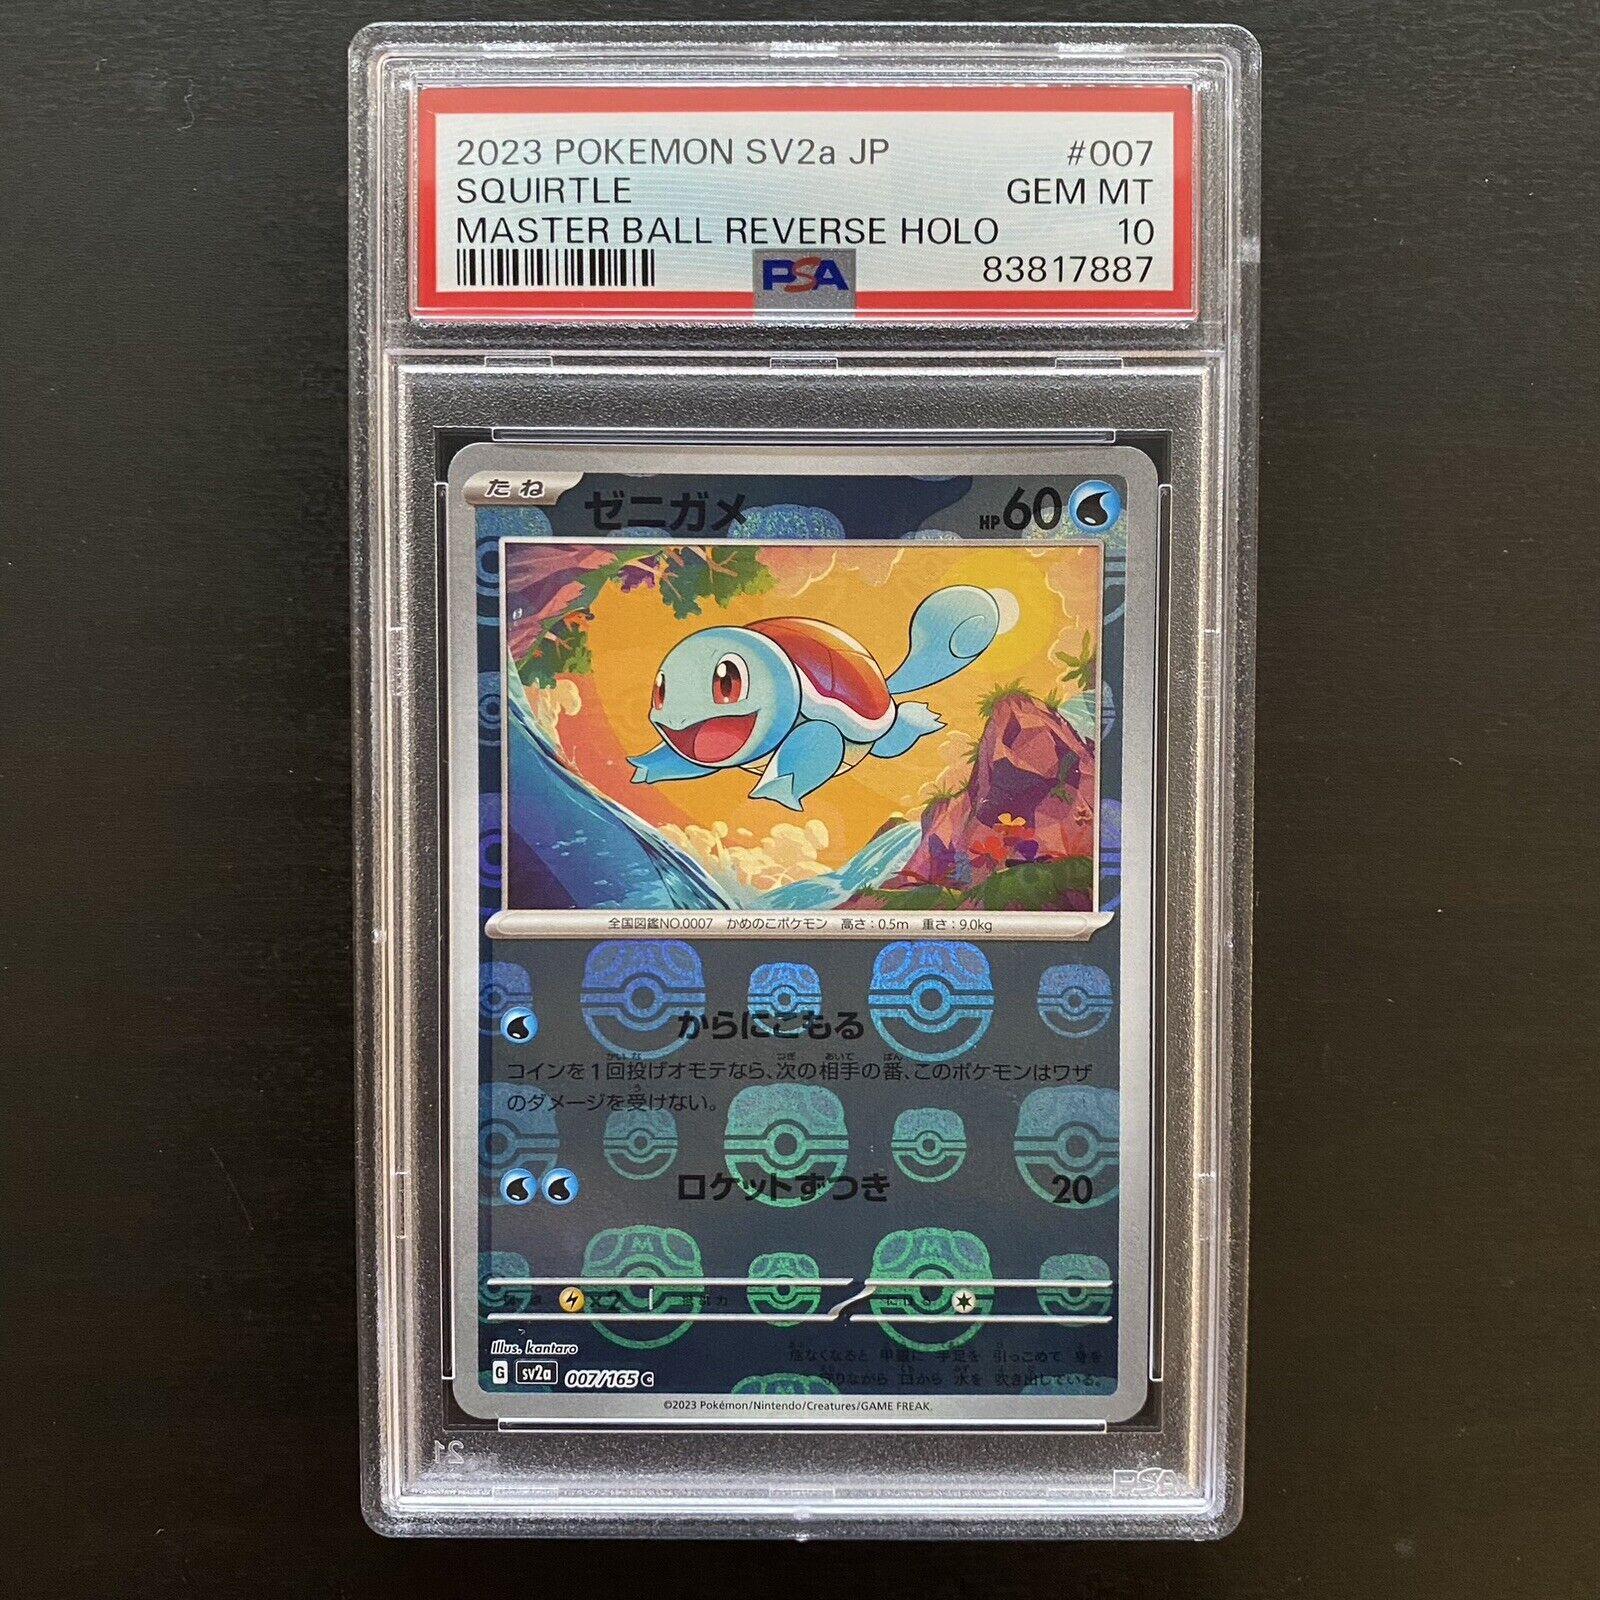 SQUIRTLE 007/165 | PSA 10 | 151 Master Ball Japanese Graded Pokémon Card